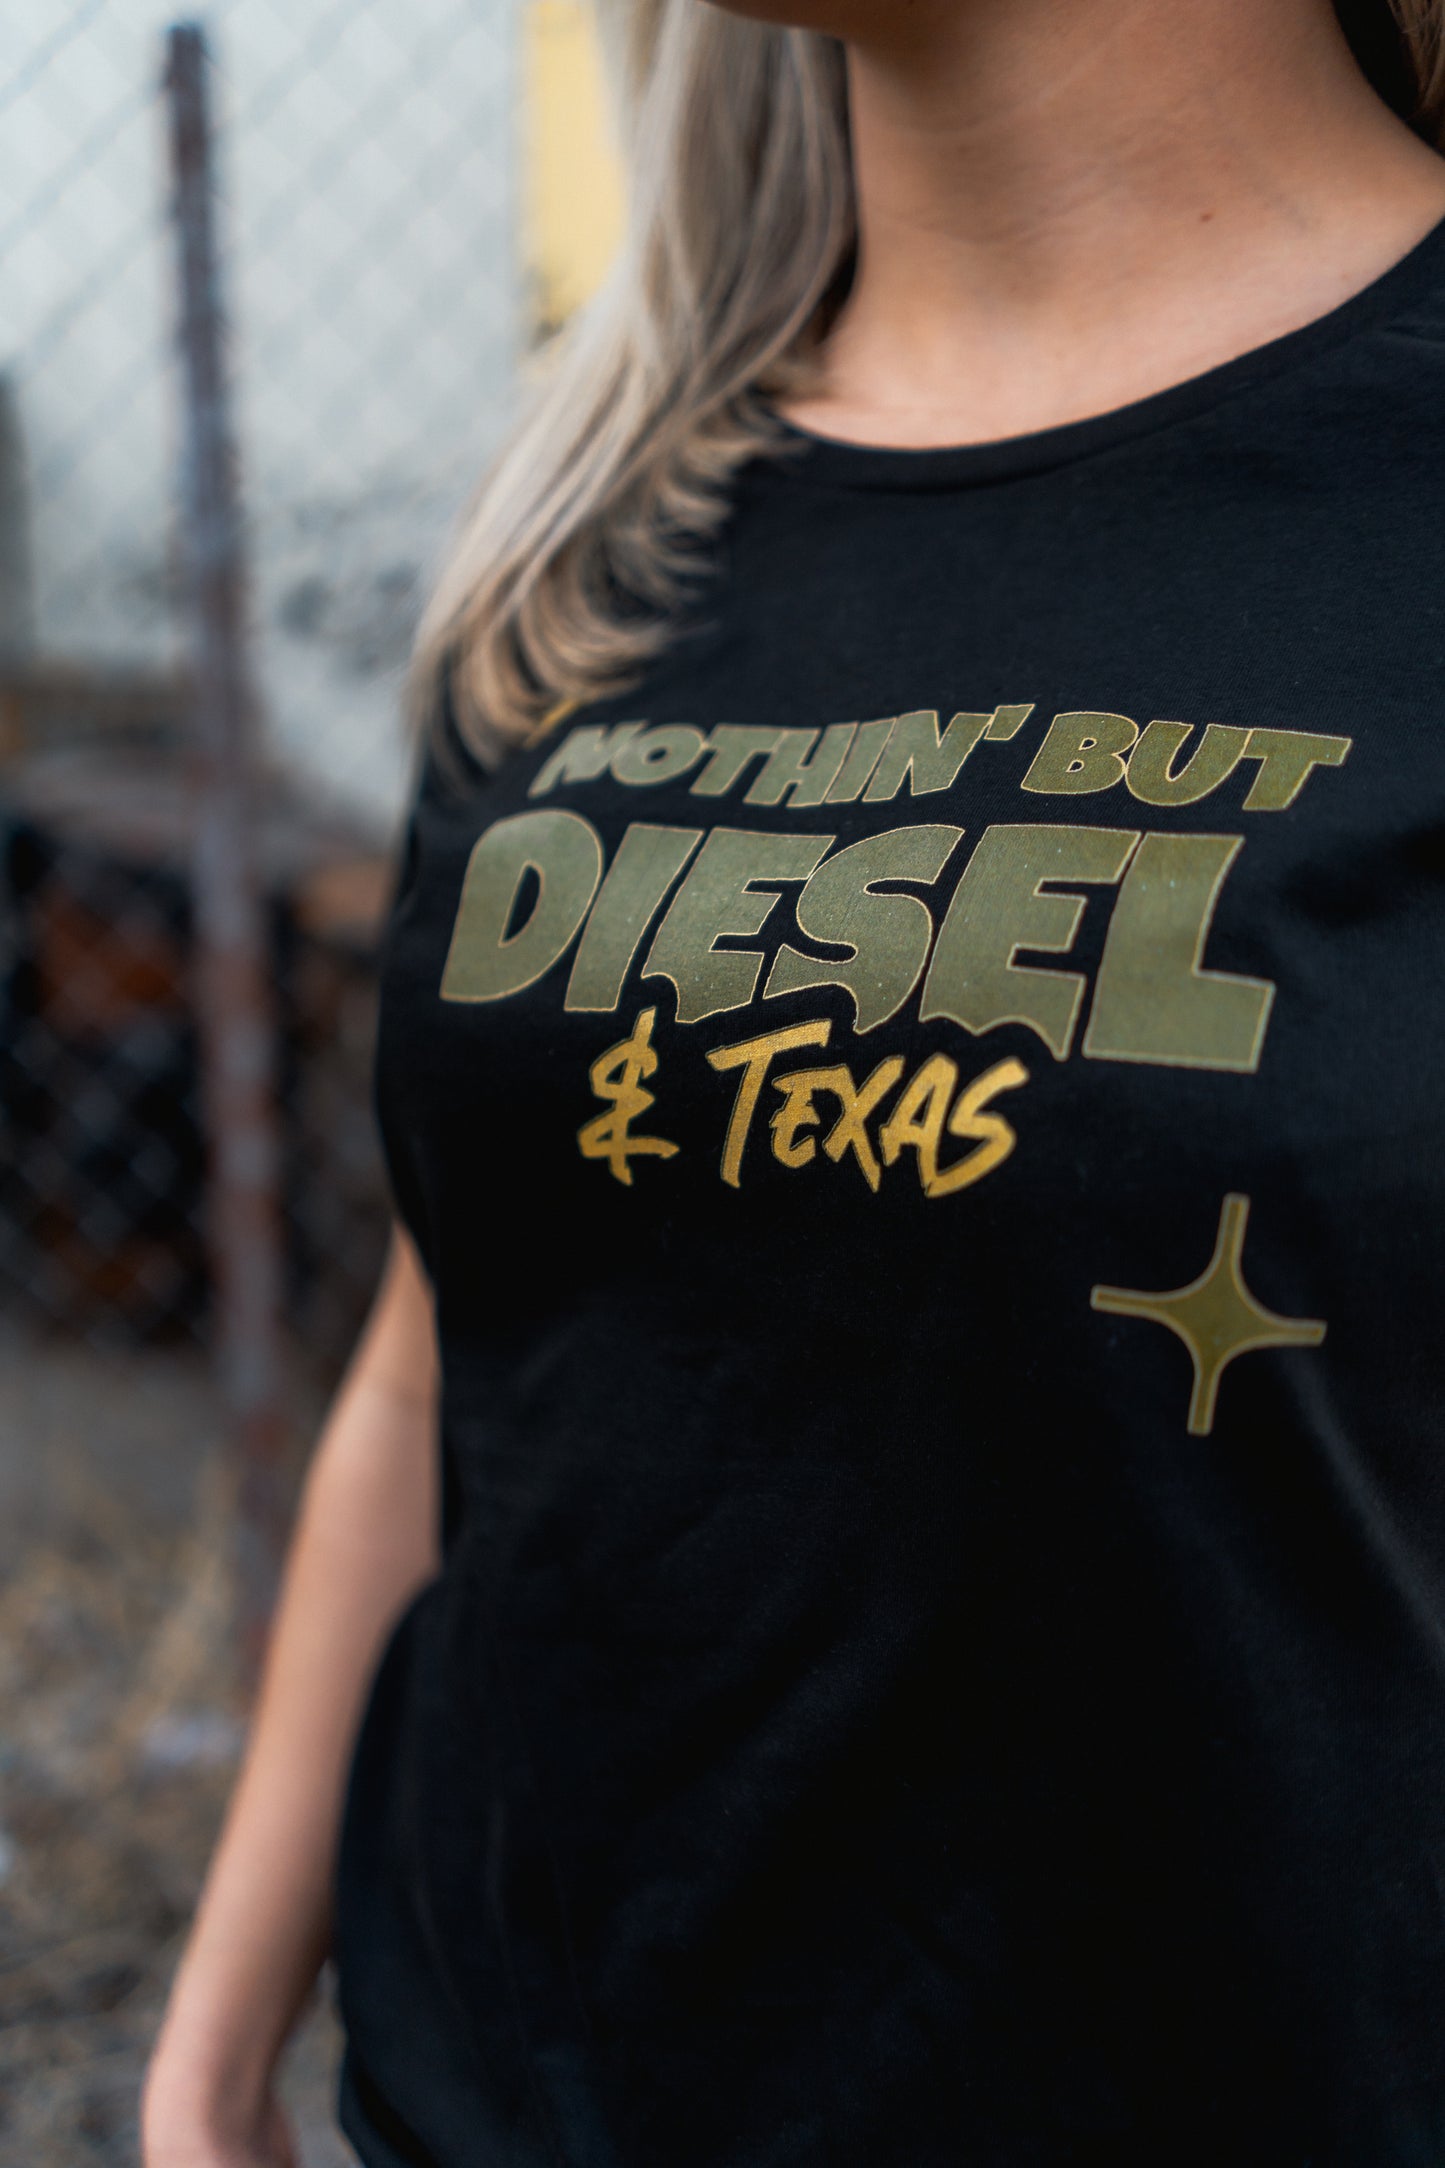 Nothin' but Diesel and Texas